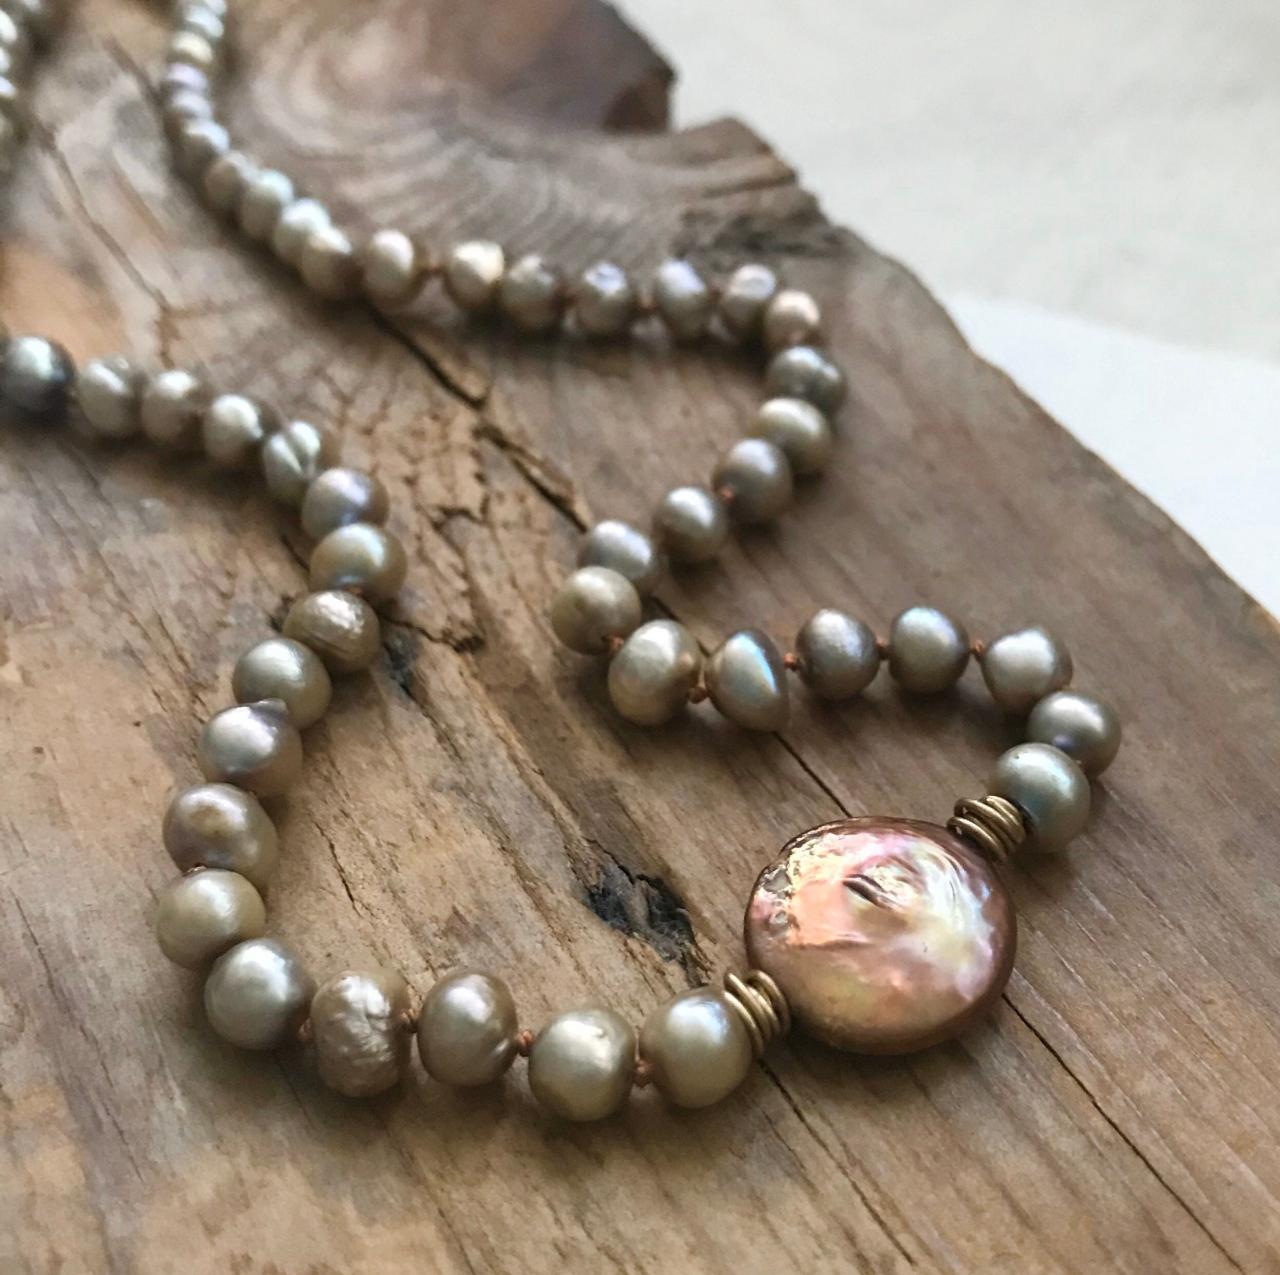 Golden Pearl Necklace With Sterling Silver. Boho Chic Gemstone Jewelry June Birthstone Statement Necklace Gifts Under 100 Anniversary Gift